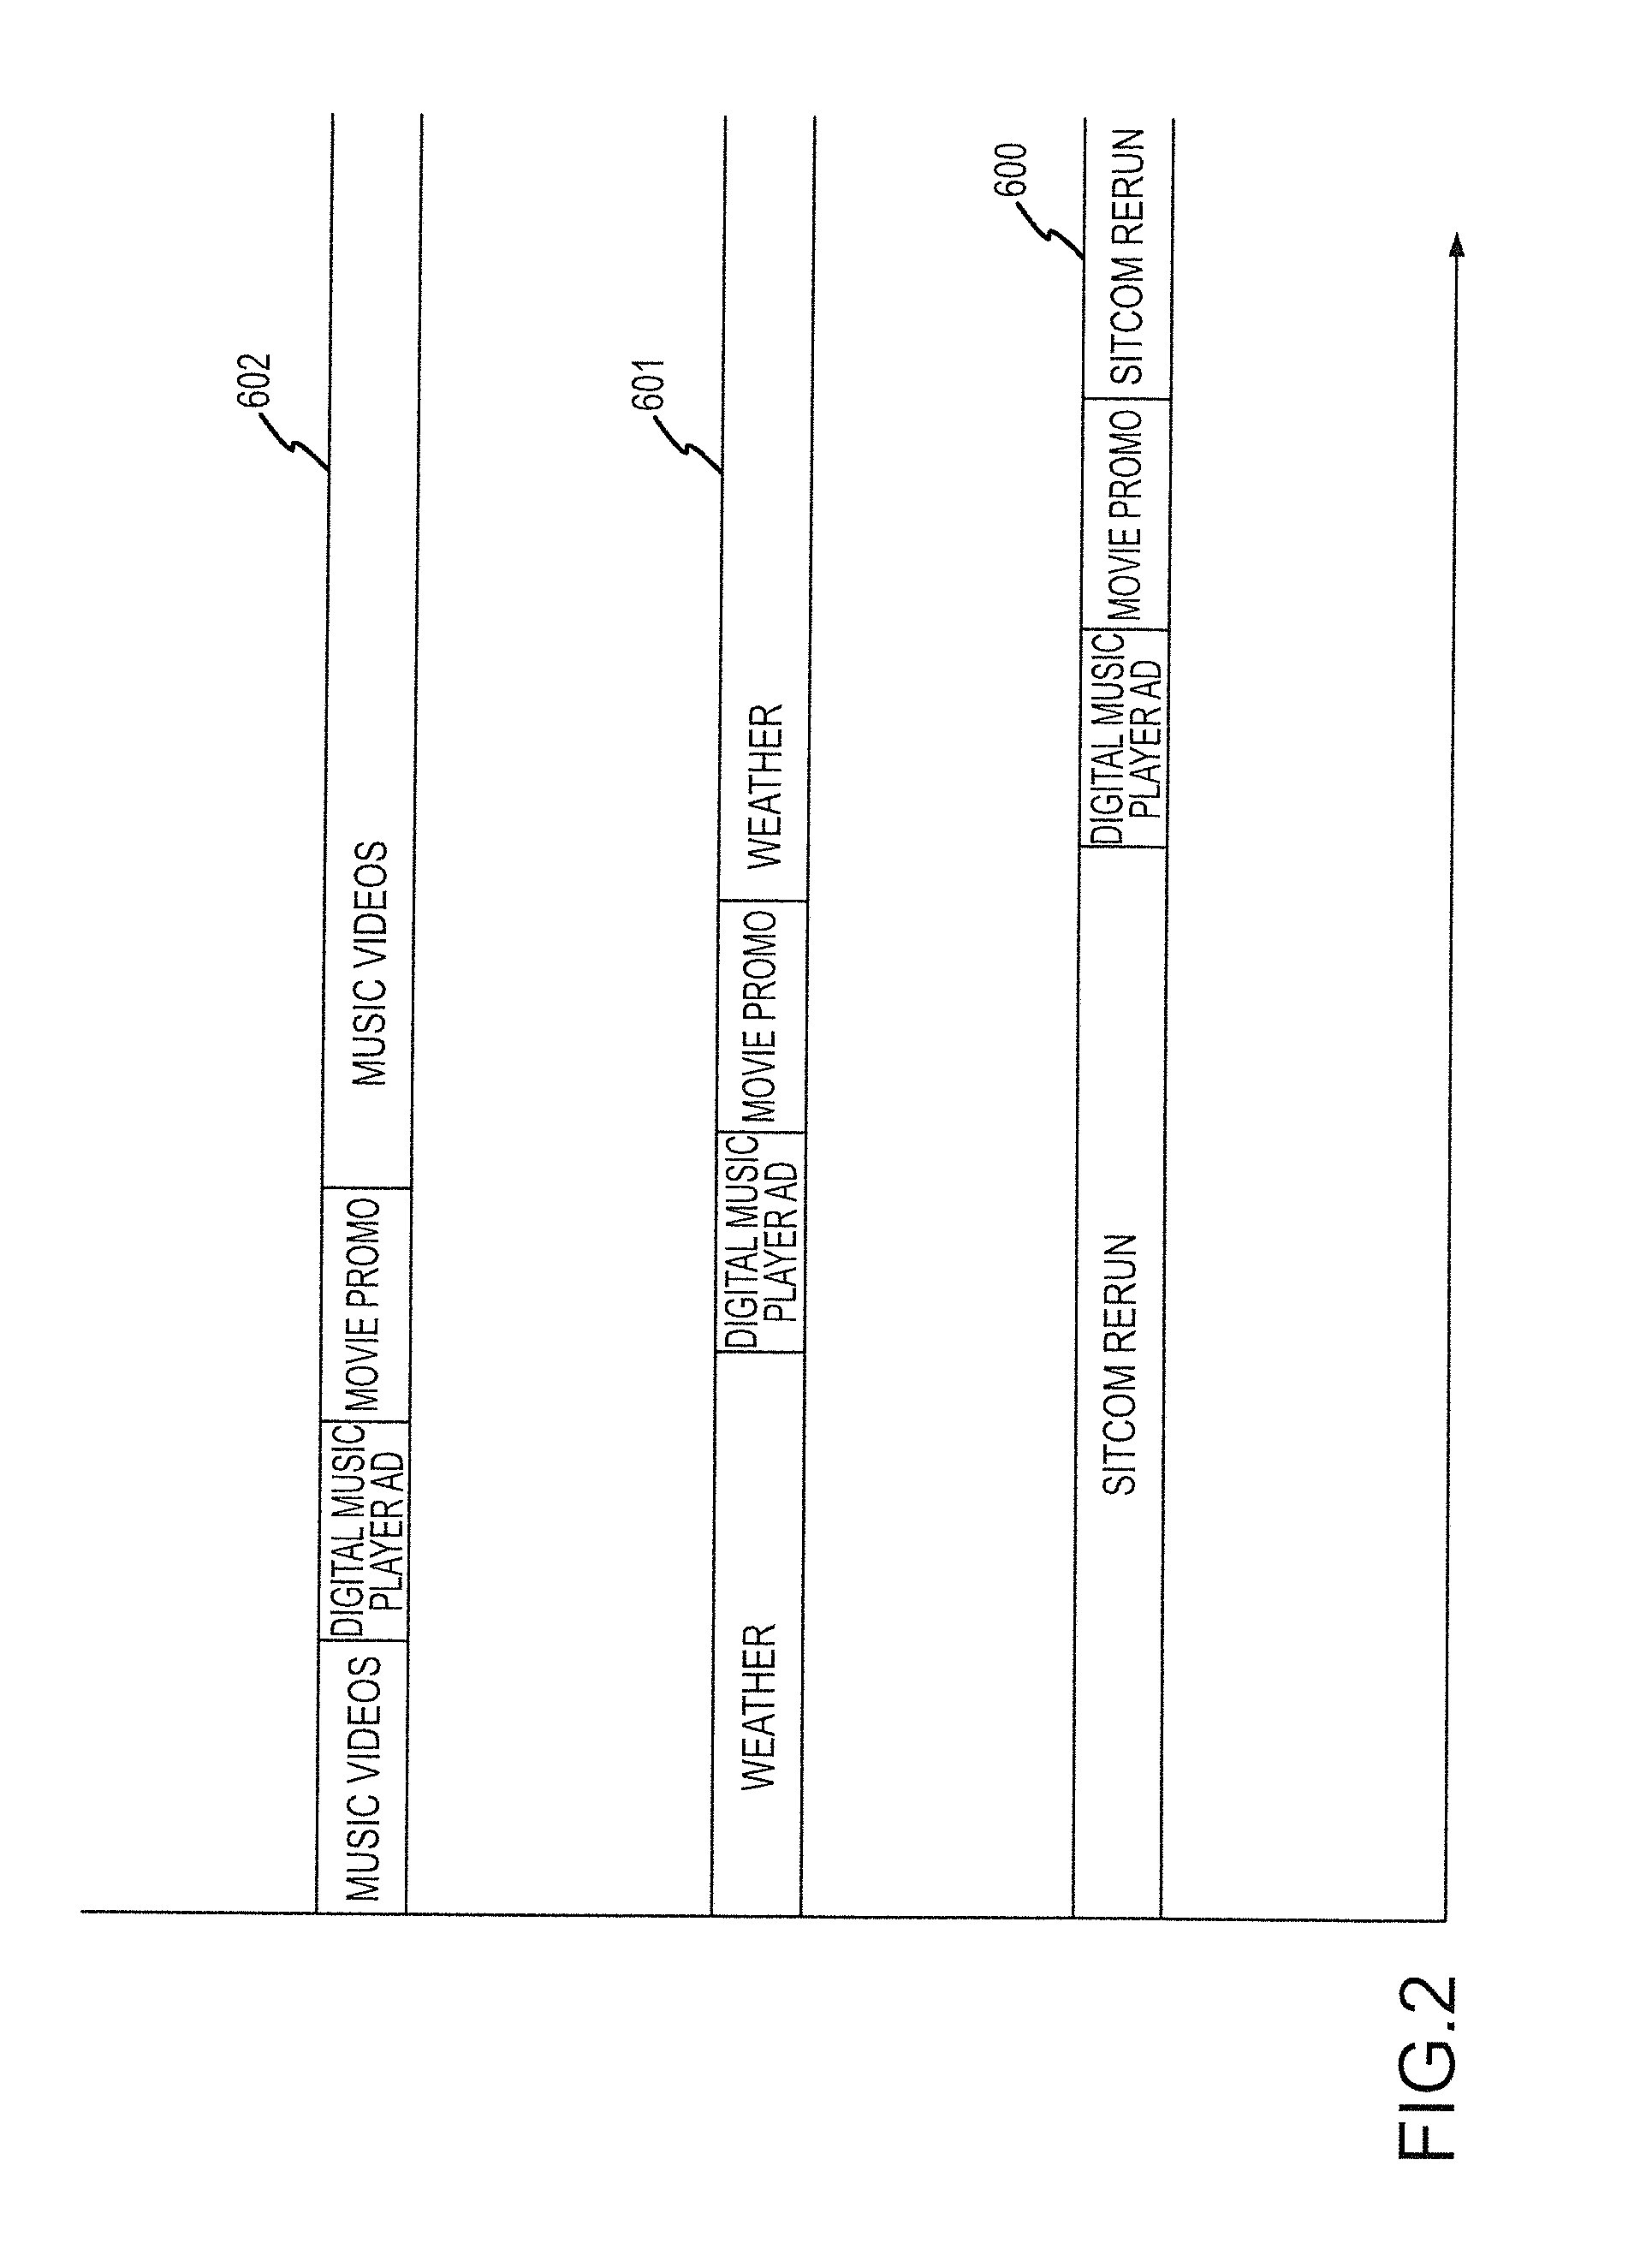 Method and apparatus to perform real-time audience estimation and commercial selection suitable for targeted advertising